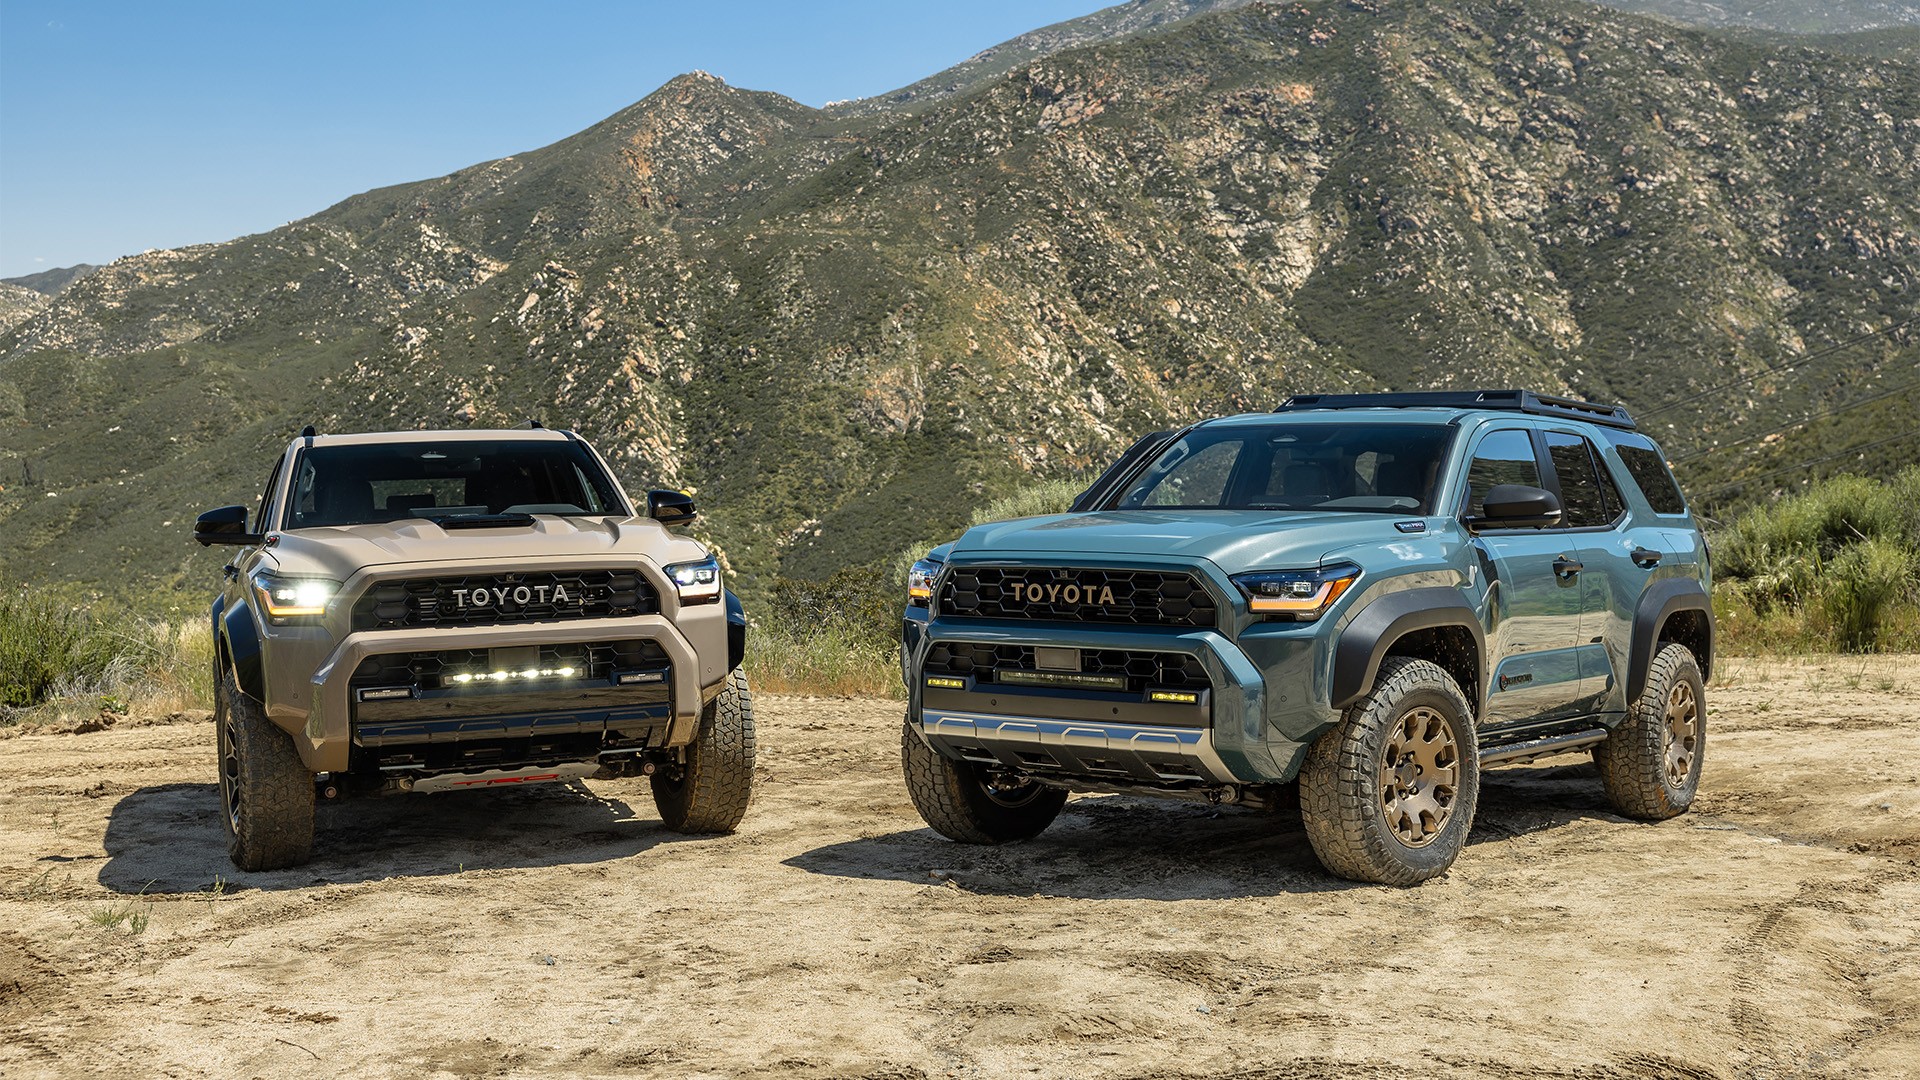 The 2025 Toyota 4Runner Loses a Longtime Off-Roading Feature